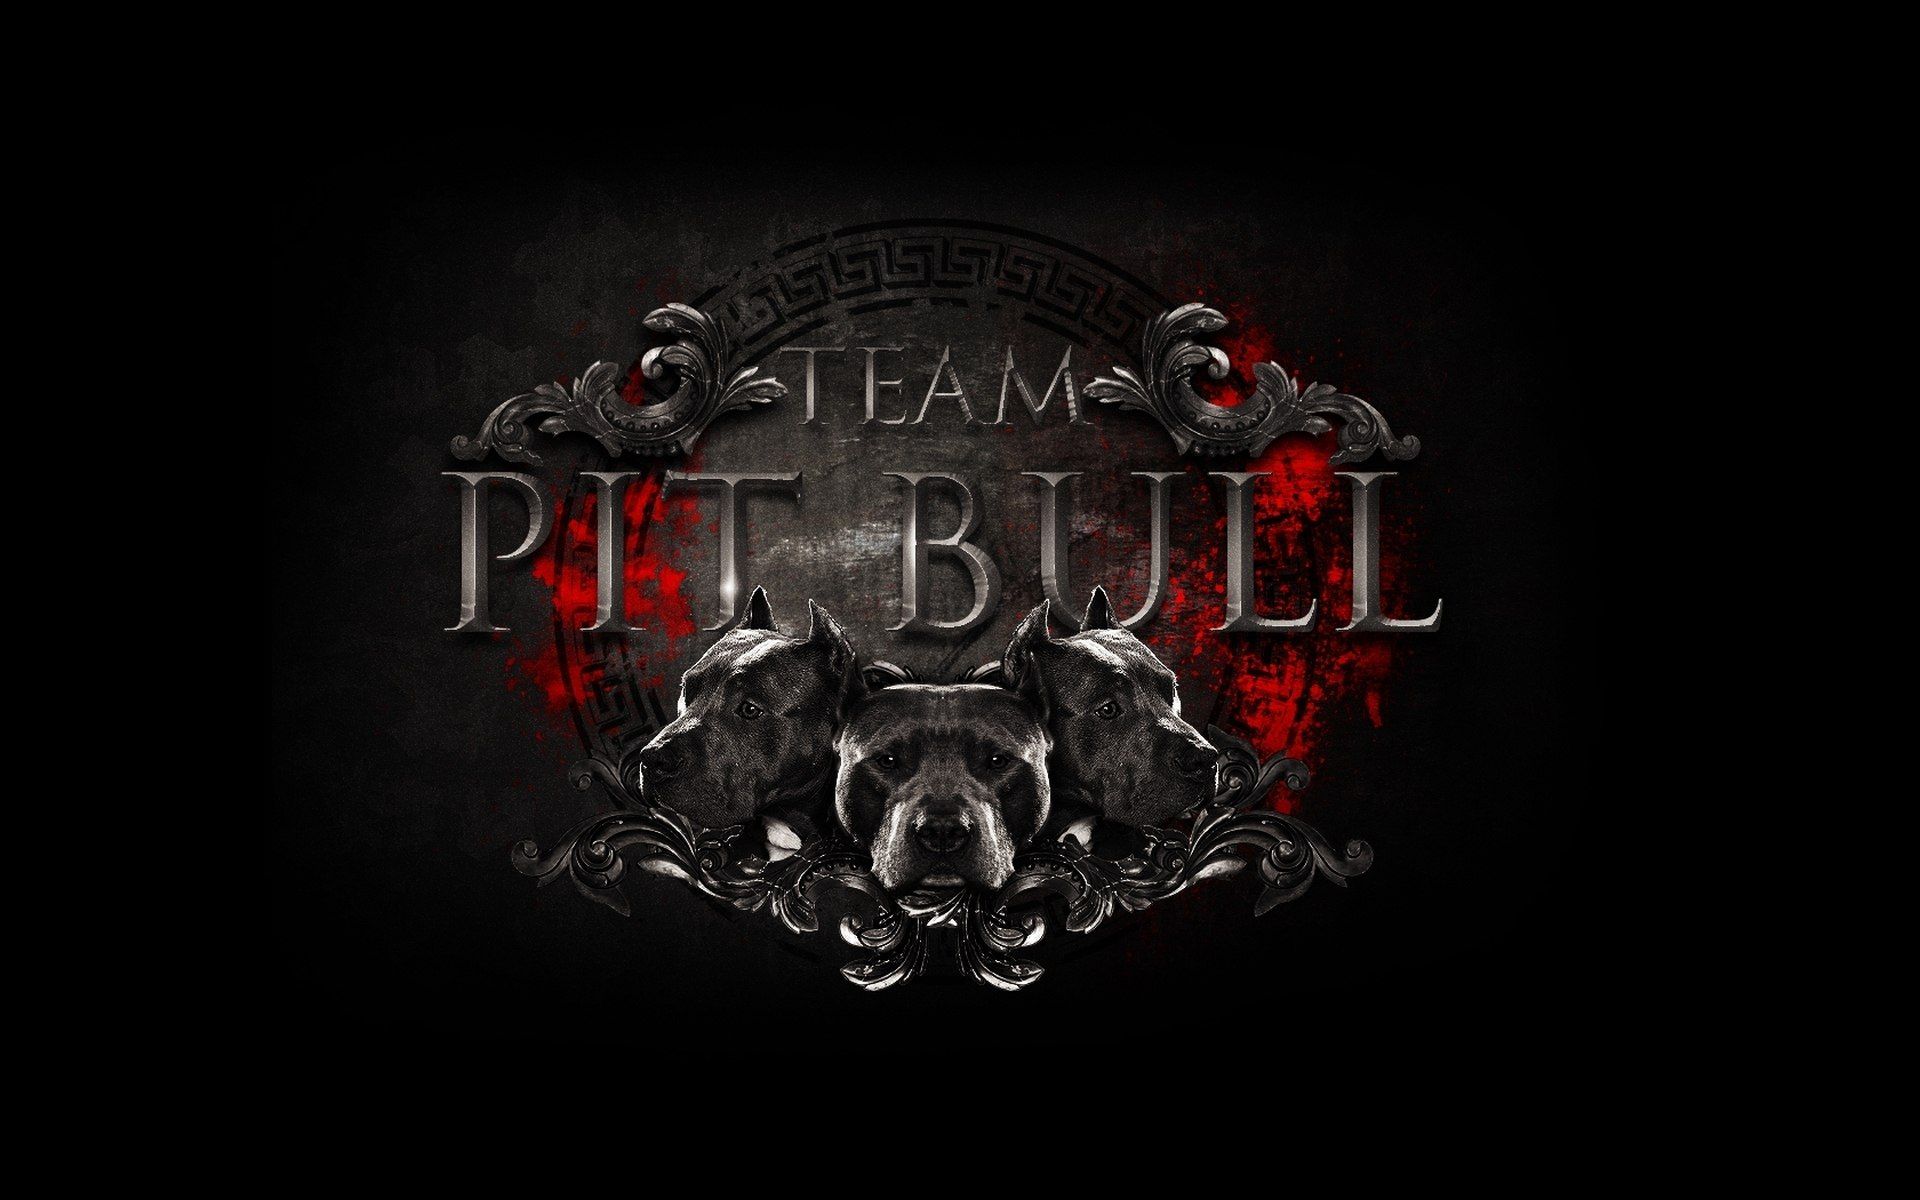 Download team pitbull wallpaper - High Quality and other